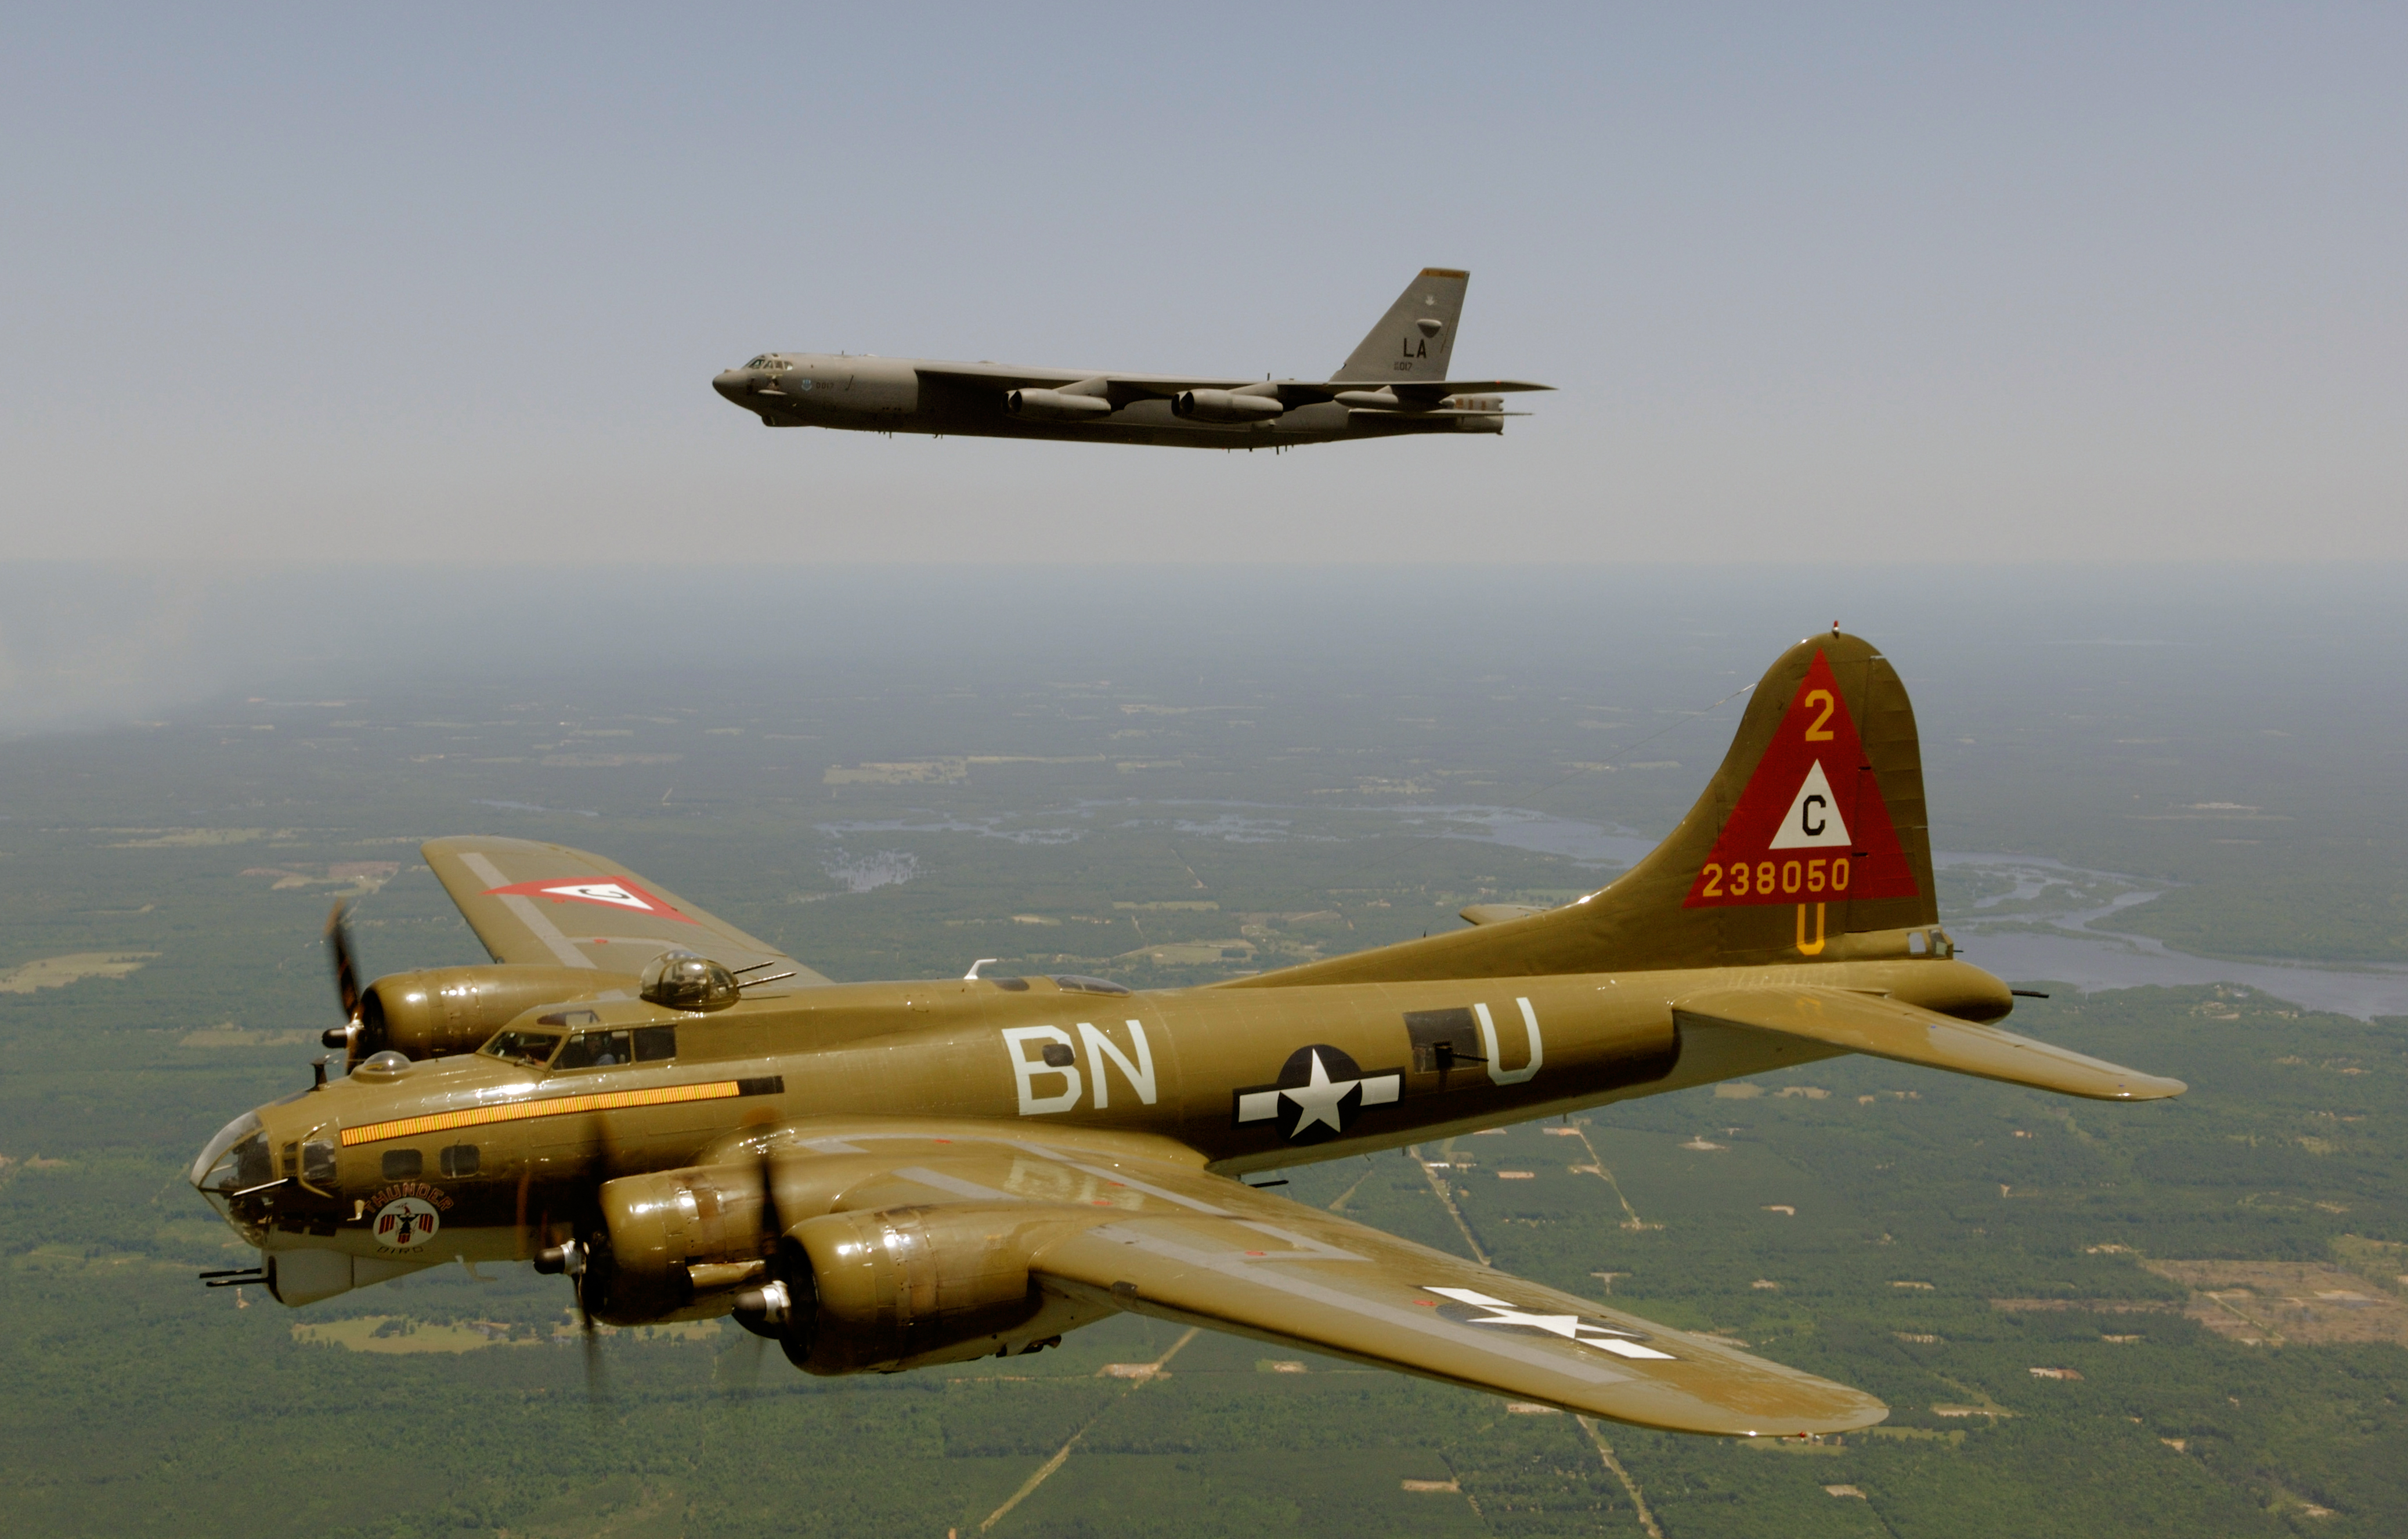 Boeing B 17 Flying Fortress Boeing B 52 Stratofortress 4149x2652